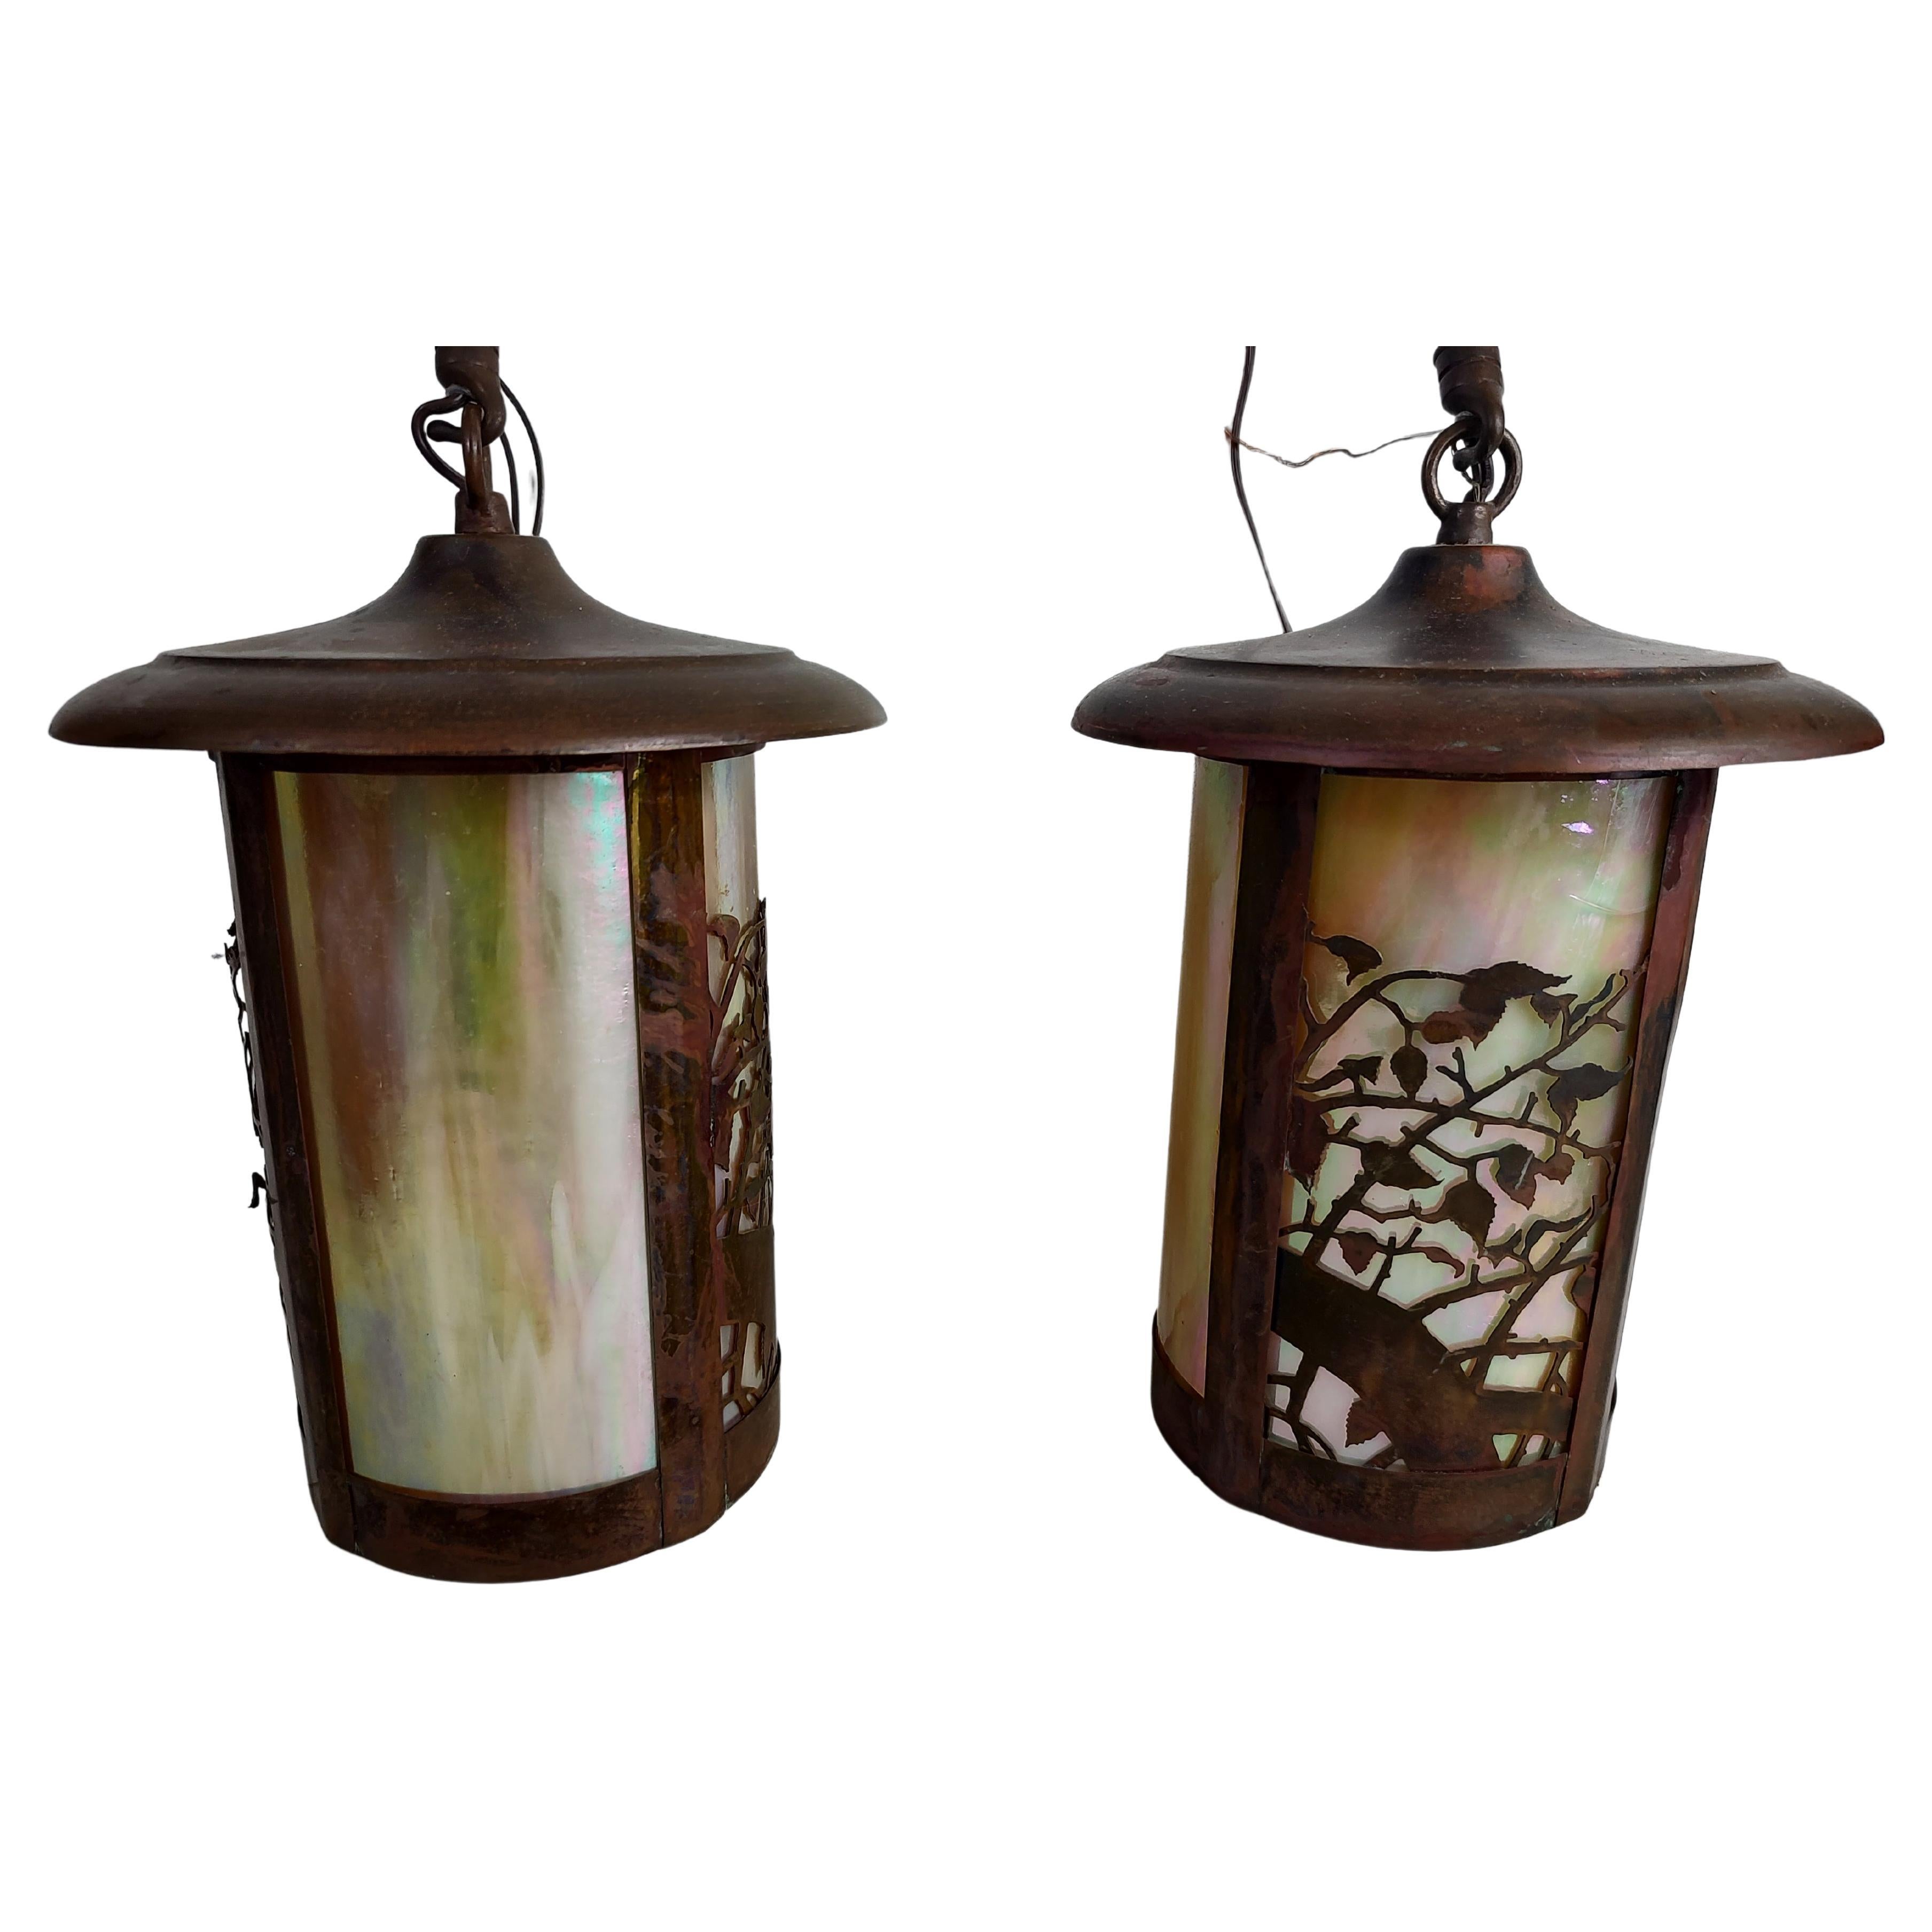 Fabulous craftsman style pendant lighting. All copper with curved slag glass Shades. In excellent vintage condition with minimal wear, just the right amount of patina. Lamp itself is 10 hgt with original downrod it's 30 inch. 4 available, priced and